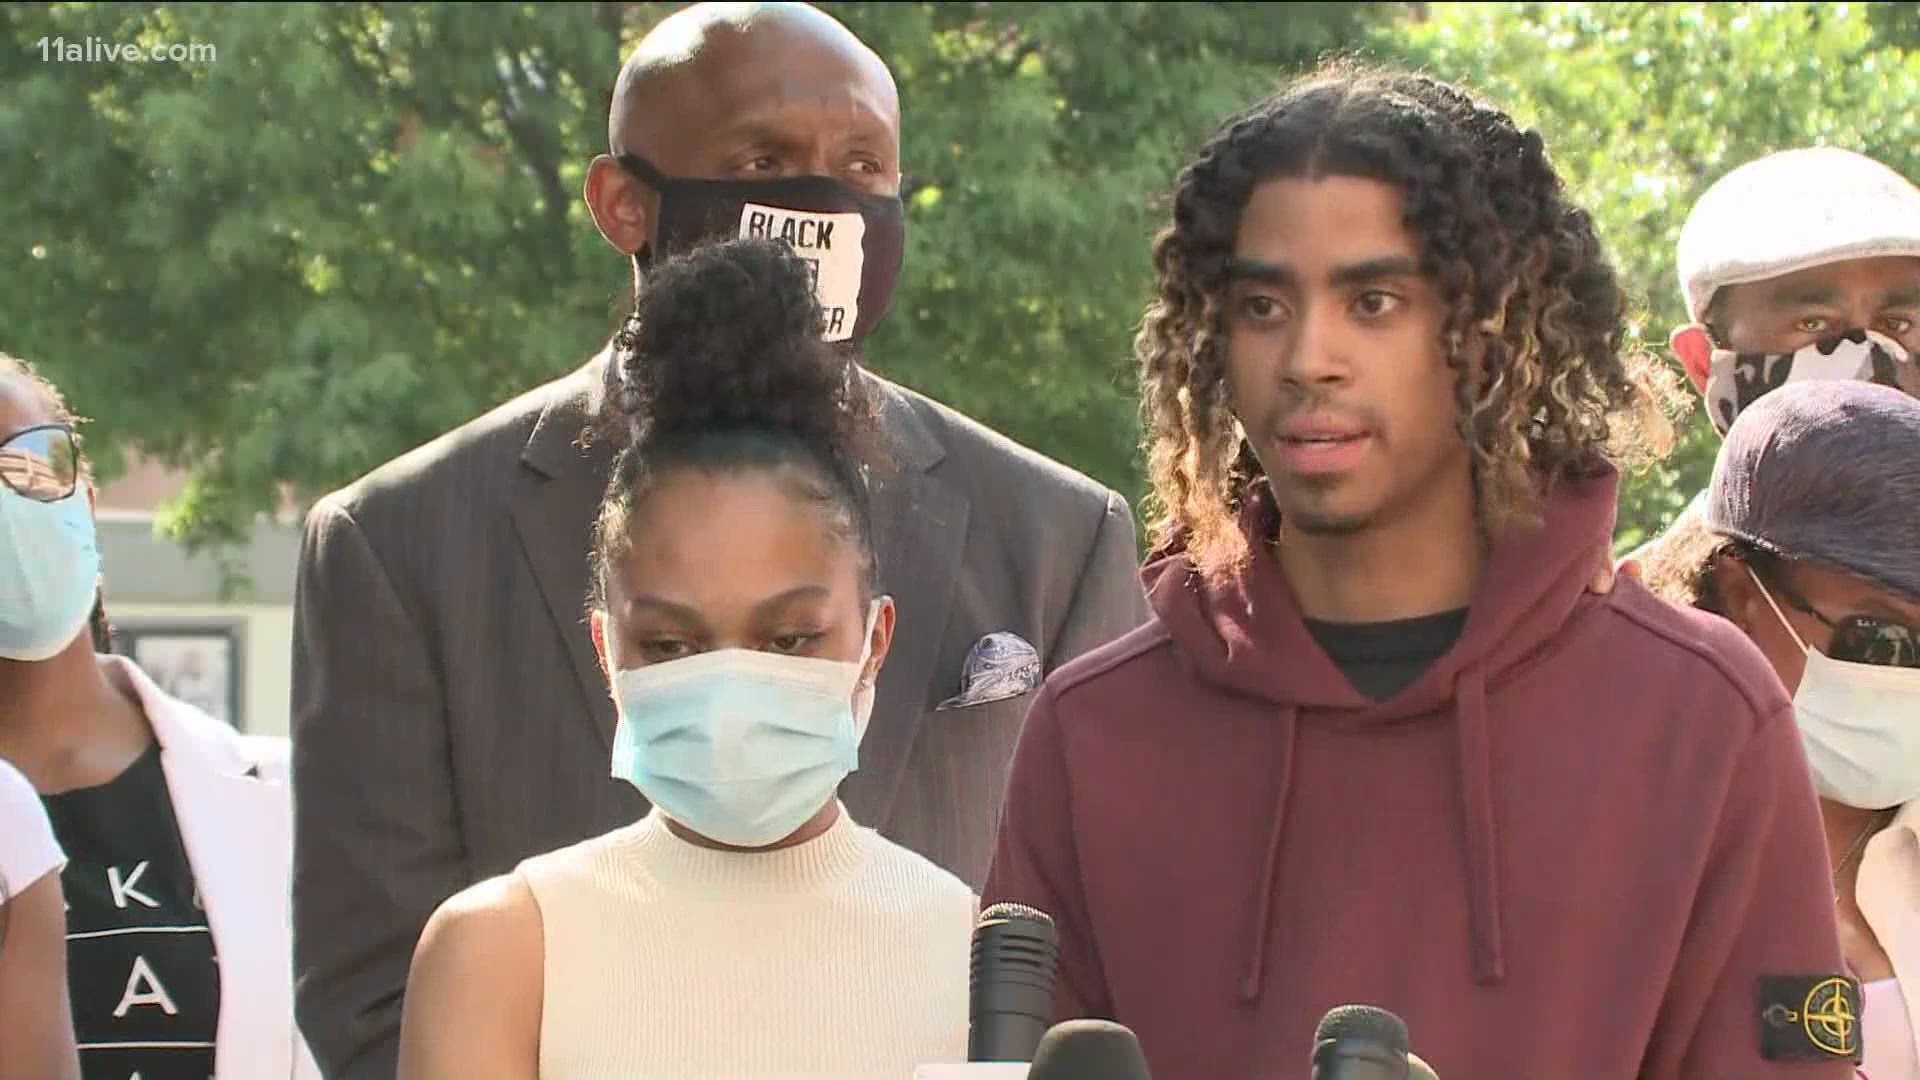 His attorneys held a news conference Thursday about the incident that happened over the weekend during a protest.